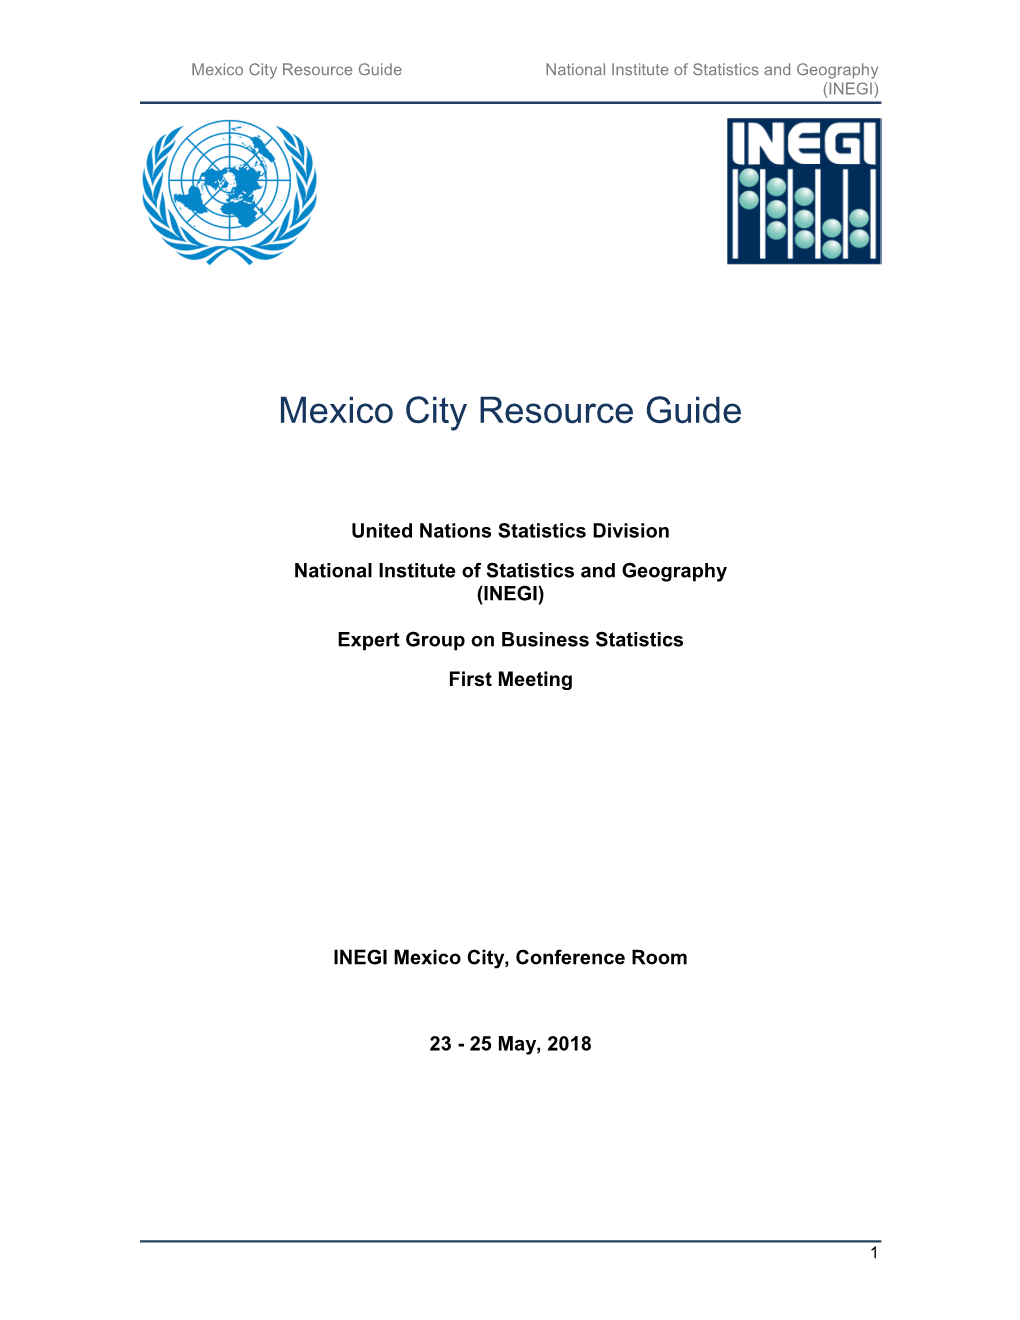 Mexico City Resource Guide National Institute of Statistics and Geography (INEGI)